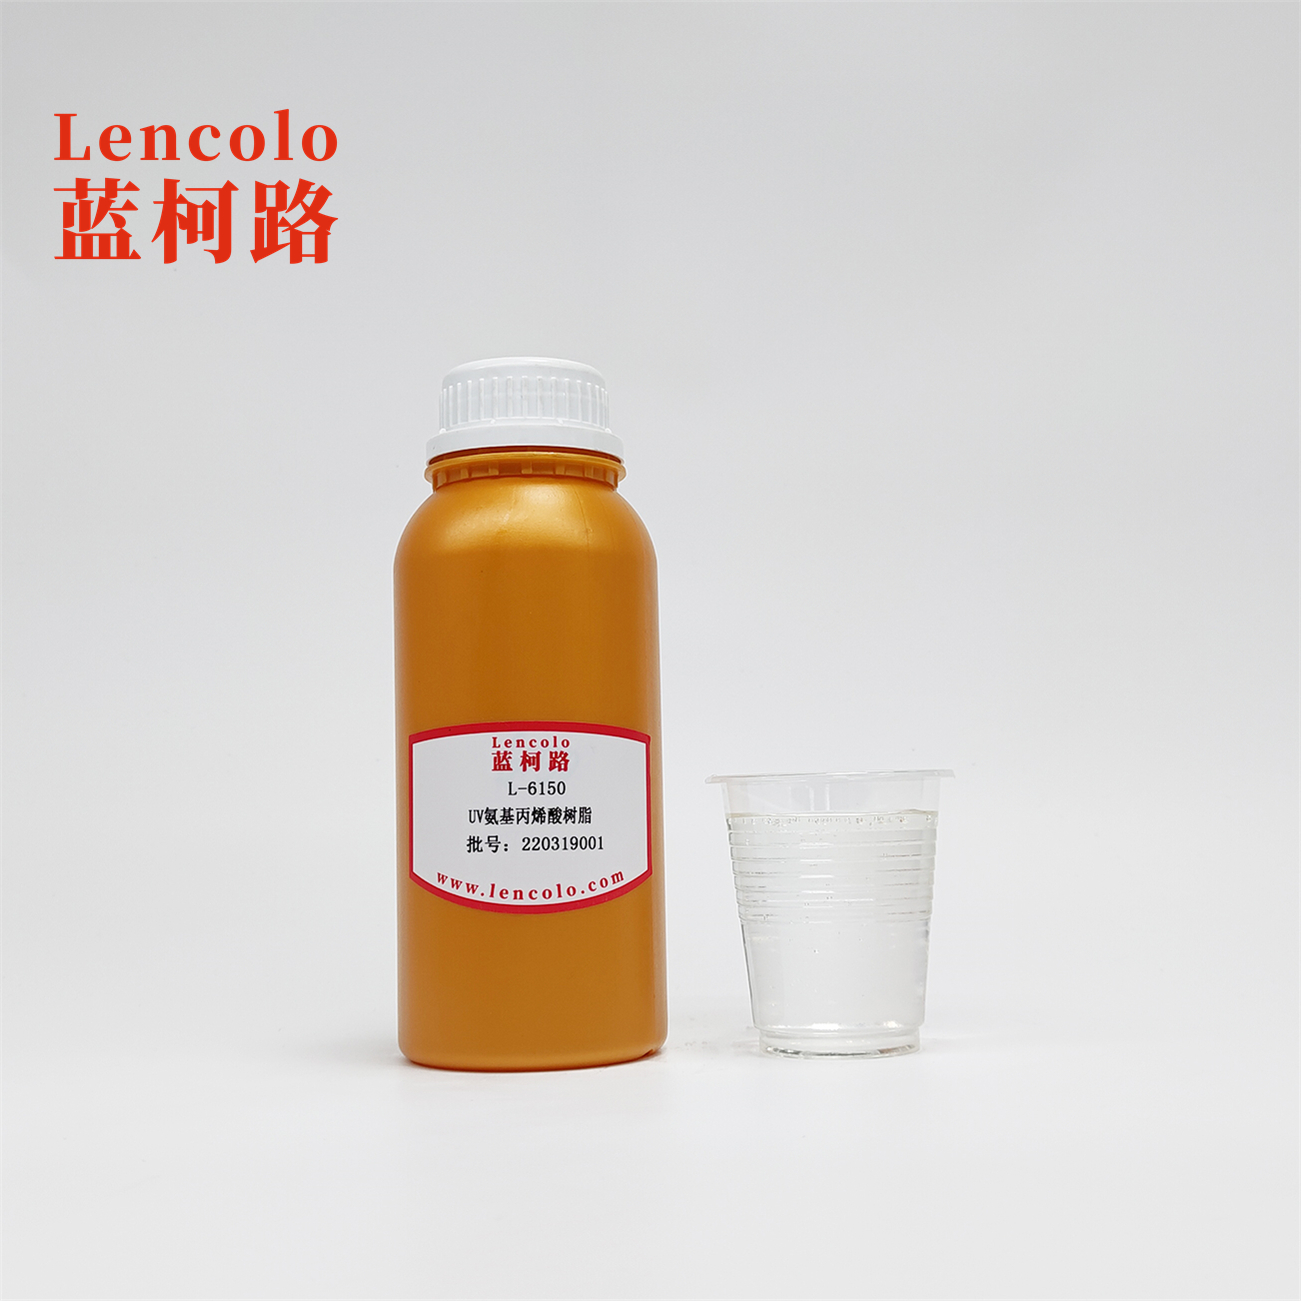 L-6150 UV amino acrylic resin has fast response speed and high cost performance used in UV wood coatings, UV paper varnish